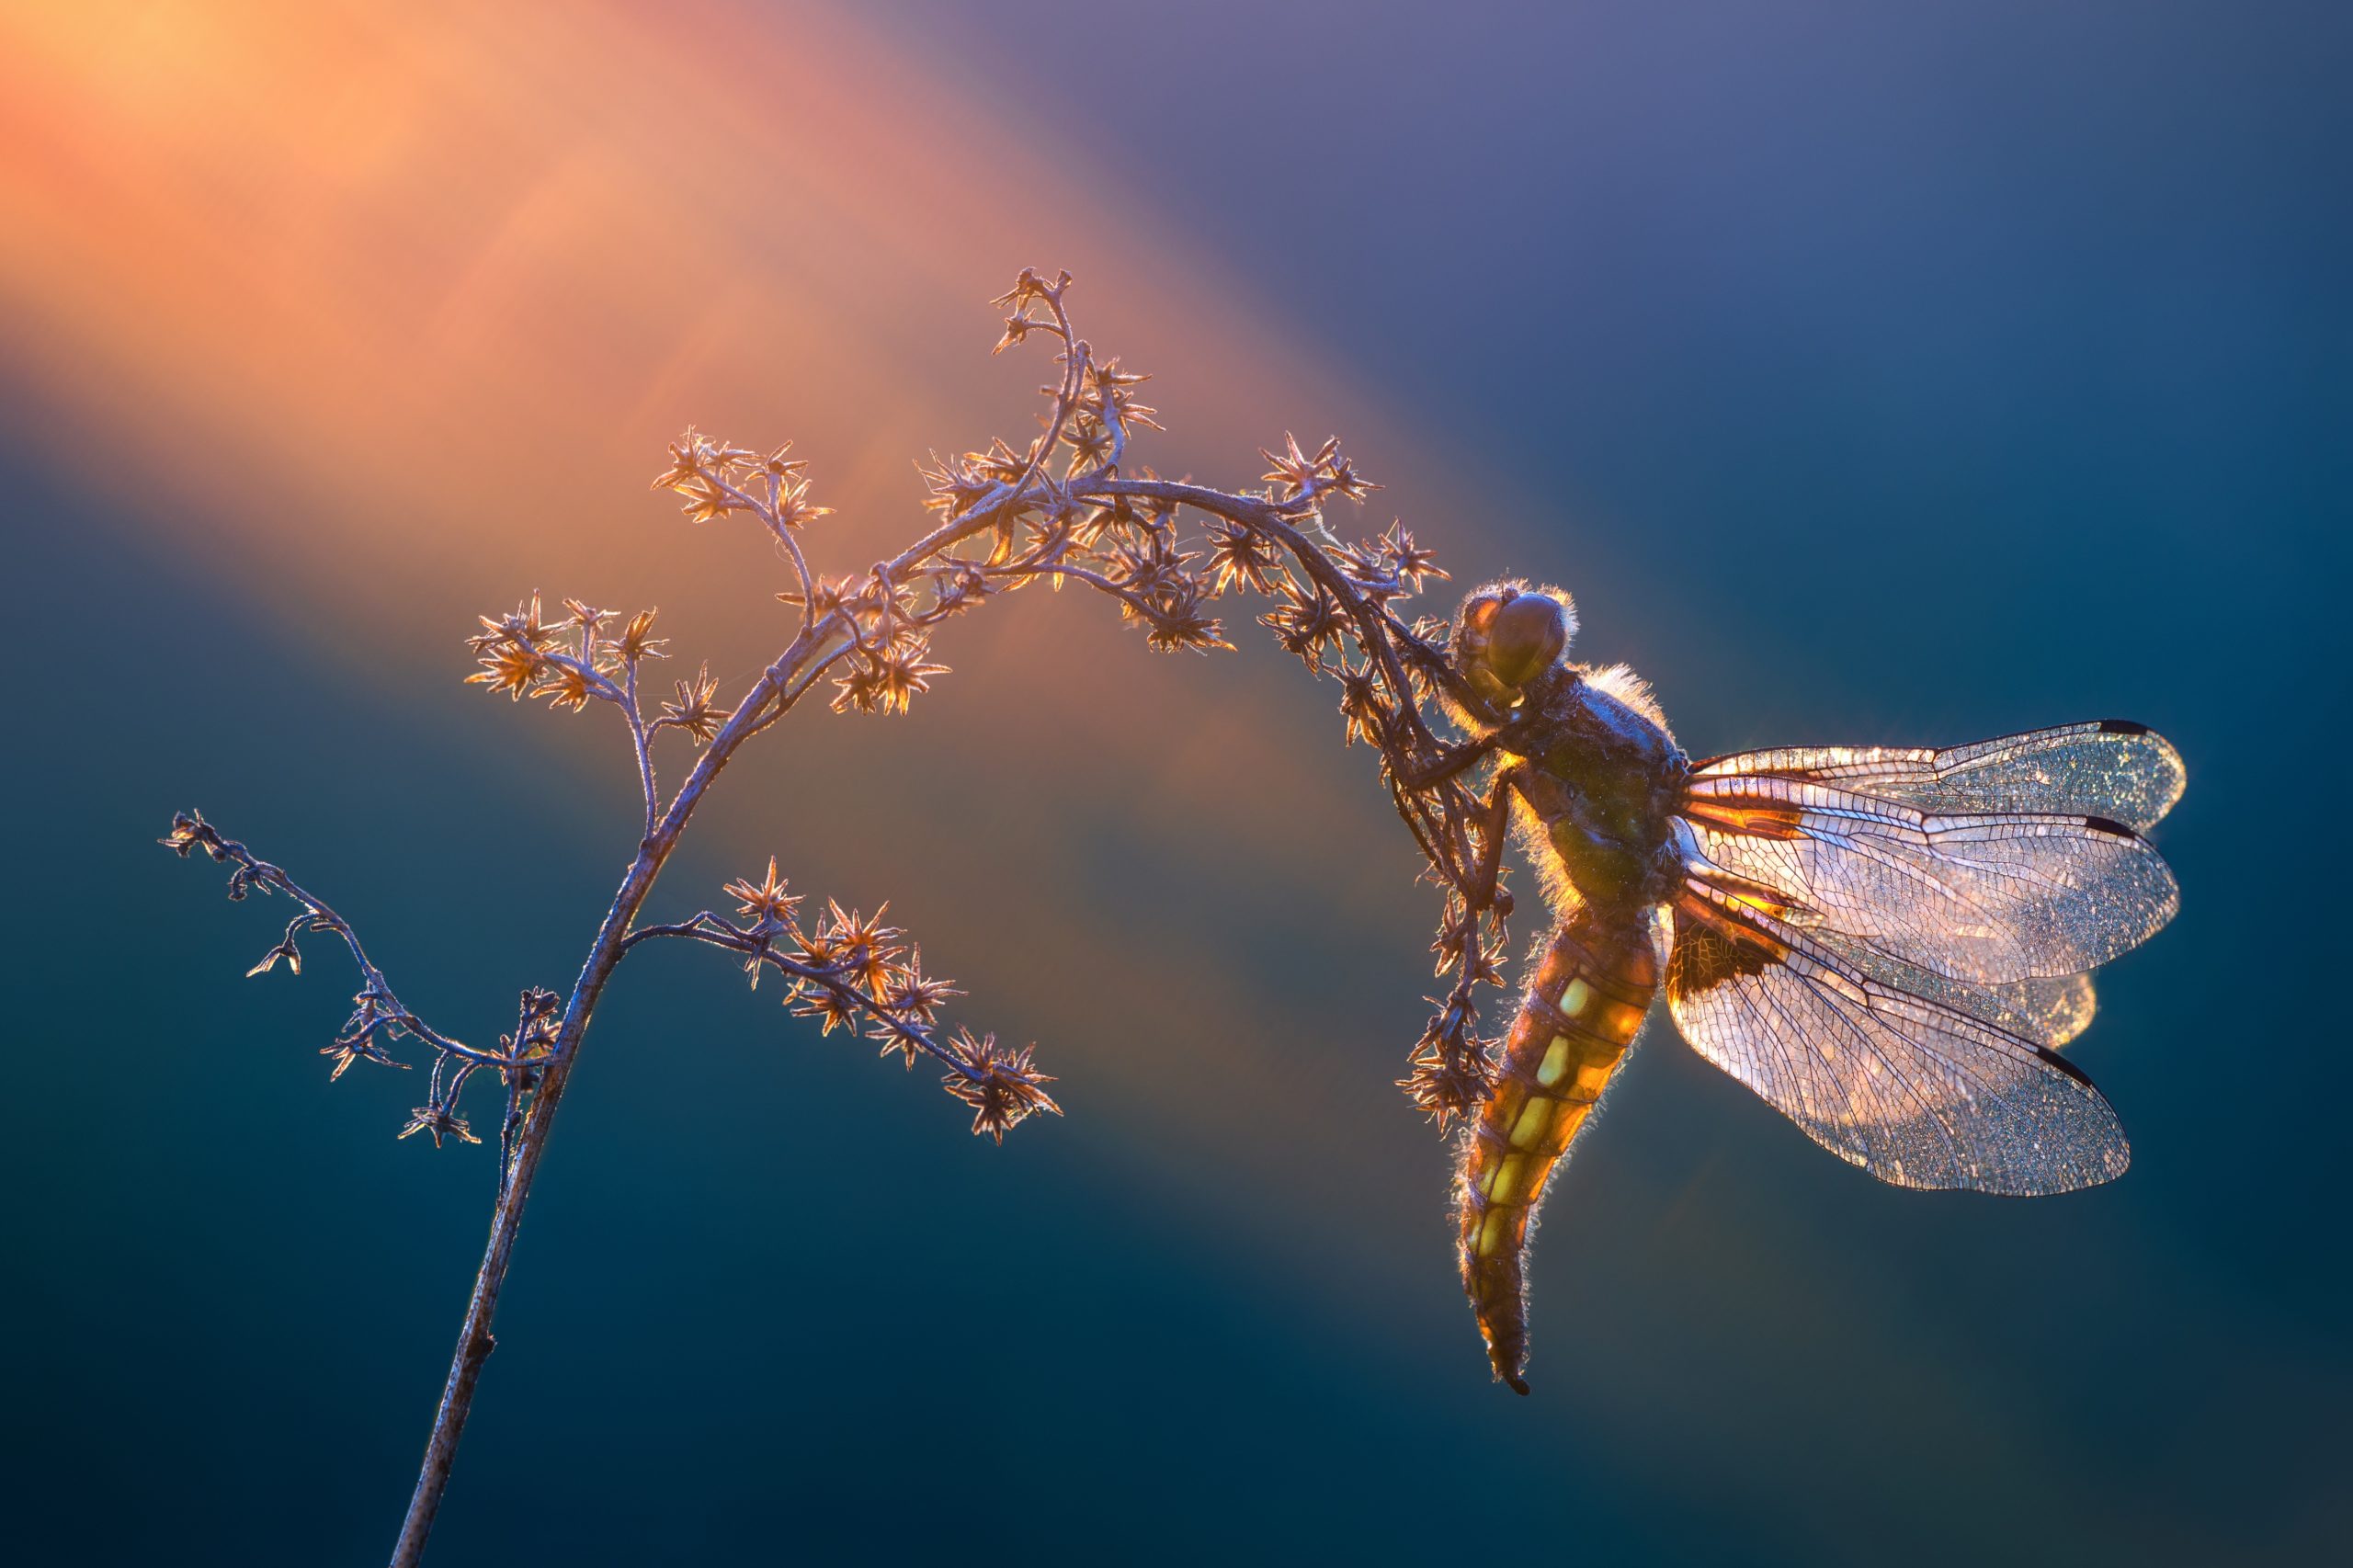 Broad-bodied chaser, Libellula depressa, on a plant stalk in the sun's rays